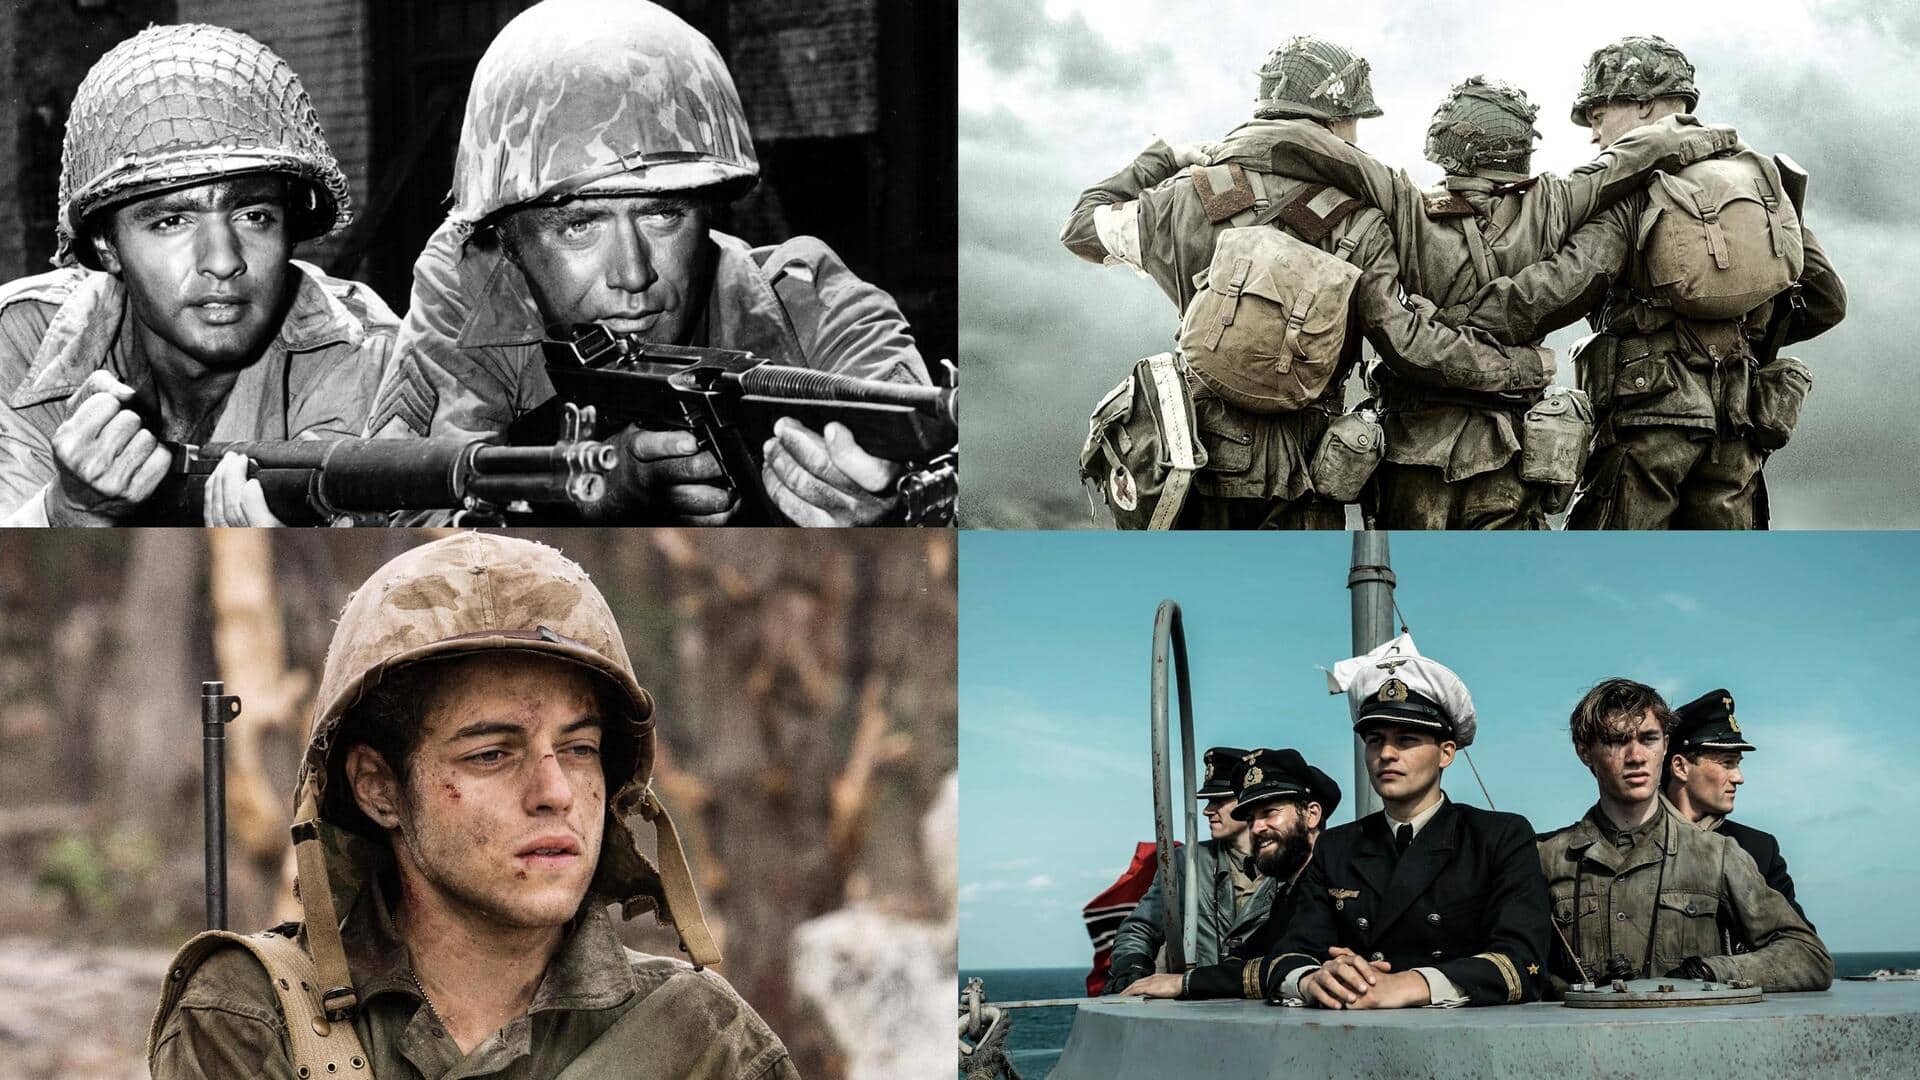 'Combat!' to 'Band of Brothers': Shows based on war